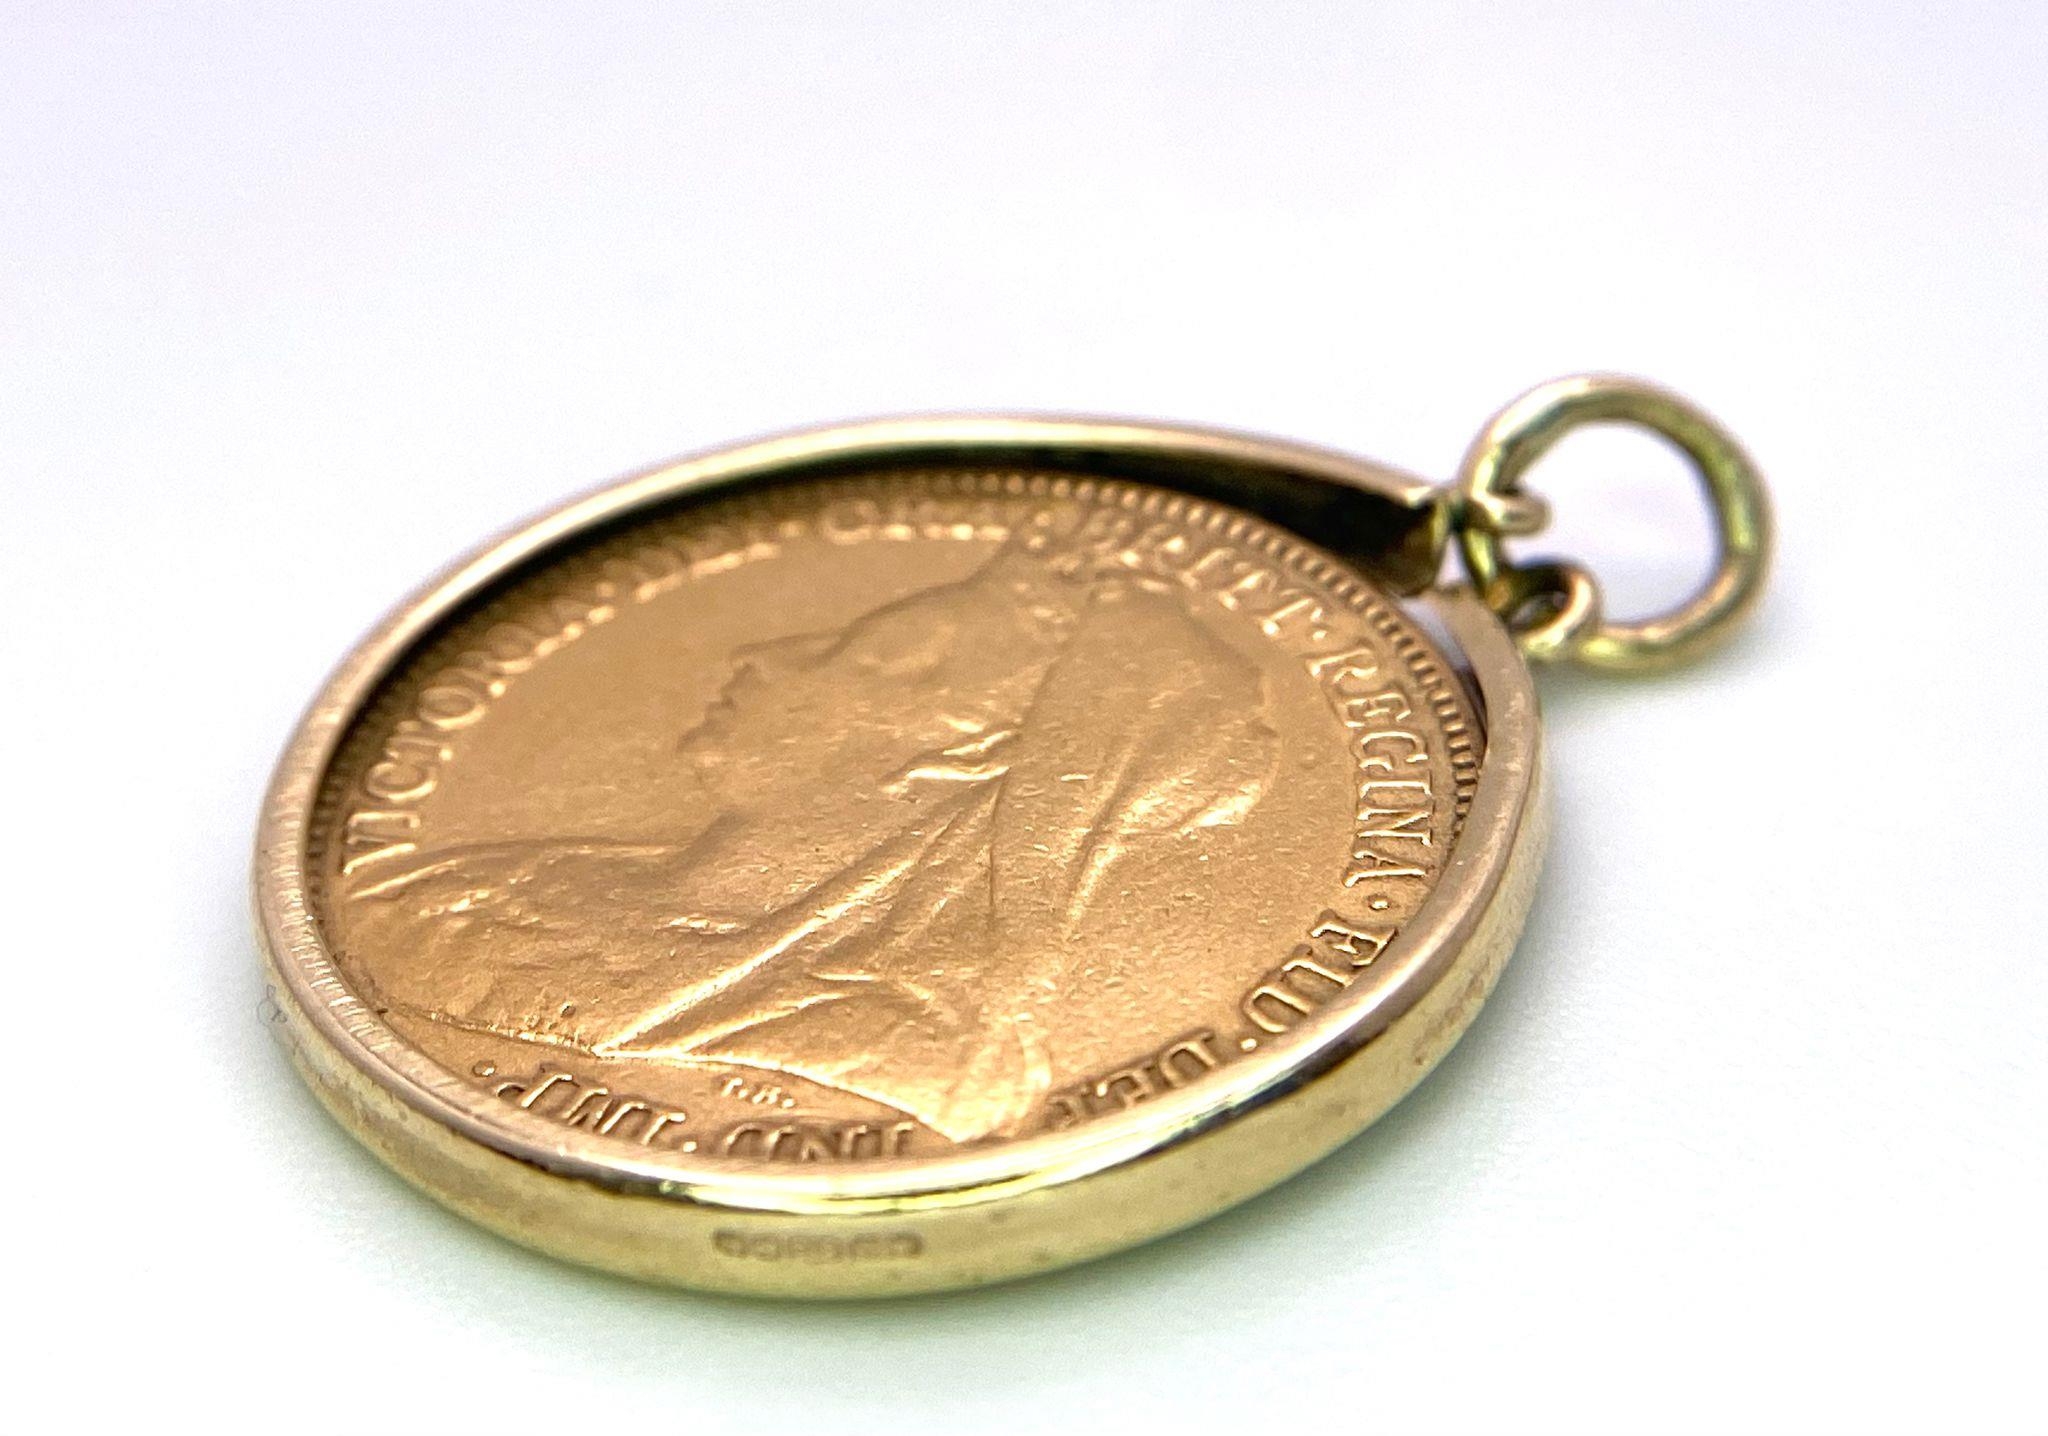 A 22k yellow gold half sovereign coin dated 1894, set in 9ct yellow gold bezel pendant mount (